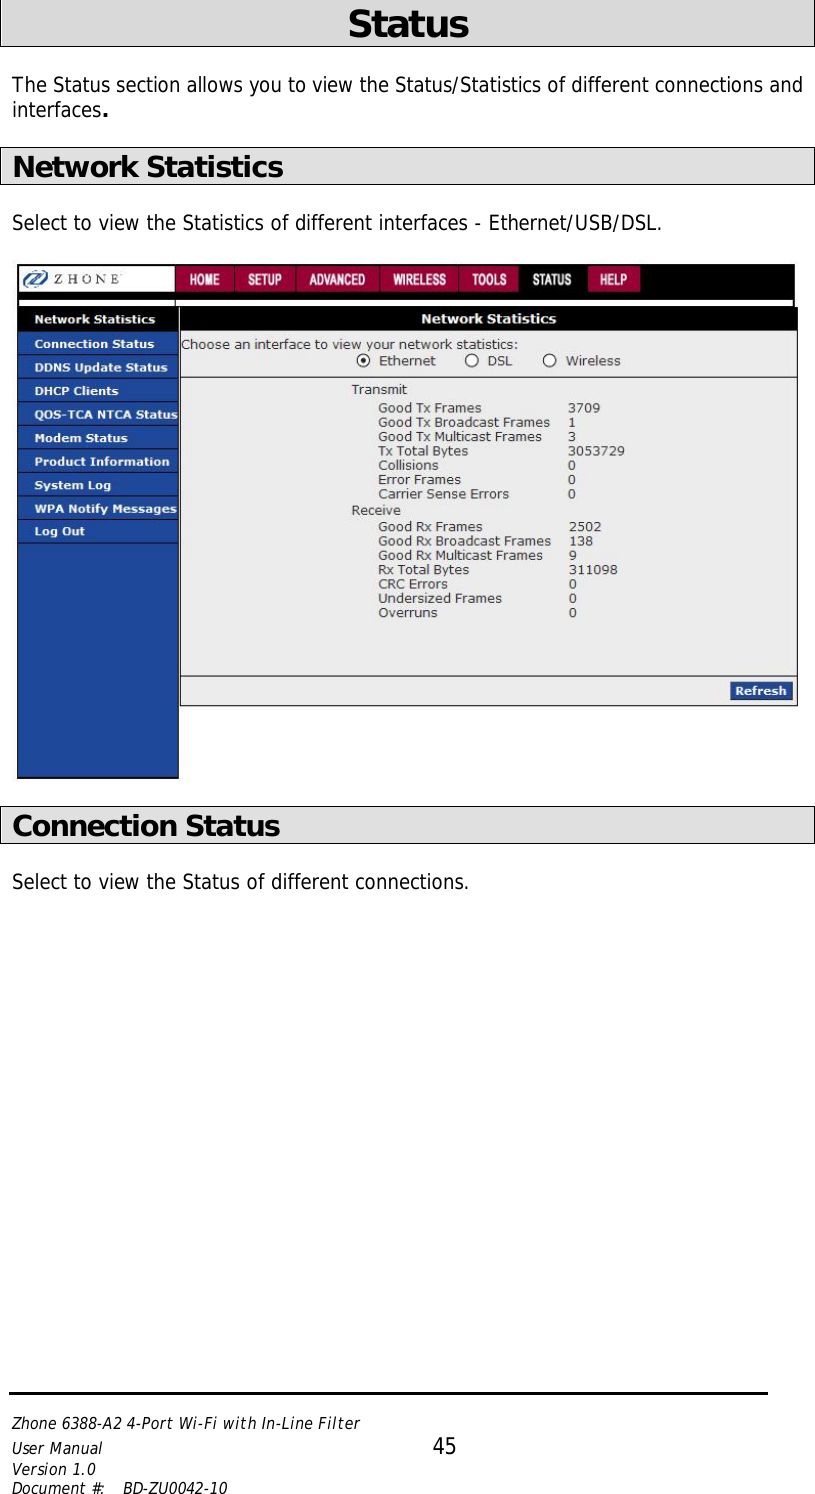   Zhone 6388-A2 4-Port Wi-Fi with In-Line Filter User Manual 45 Version 1.0 Document #:  BD-ZU0042-10    Status    The Status section allows you to view the Status/Statistics of different connections and interfaces.  Network Statistics  Select to view the Statistics of different interfaces - Ethernet/USB/DSL.    Connection Status  Select to view the Status of different connections.   